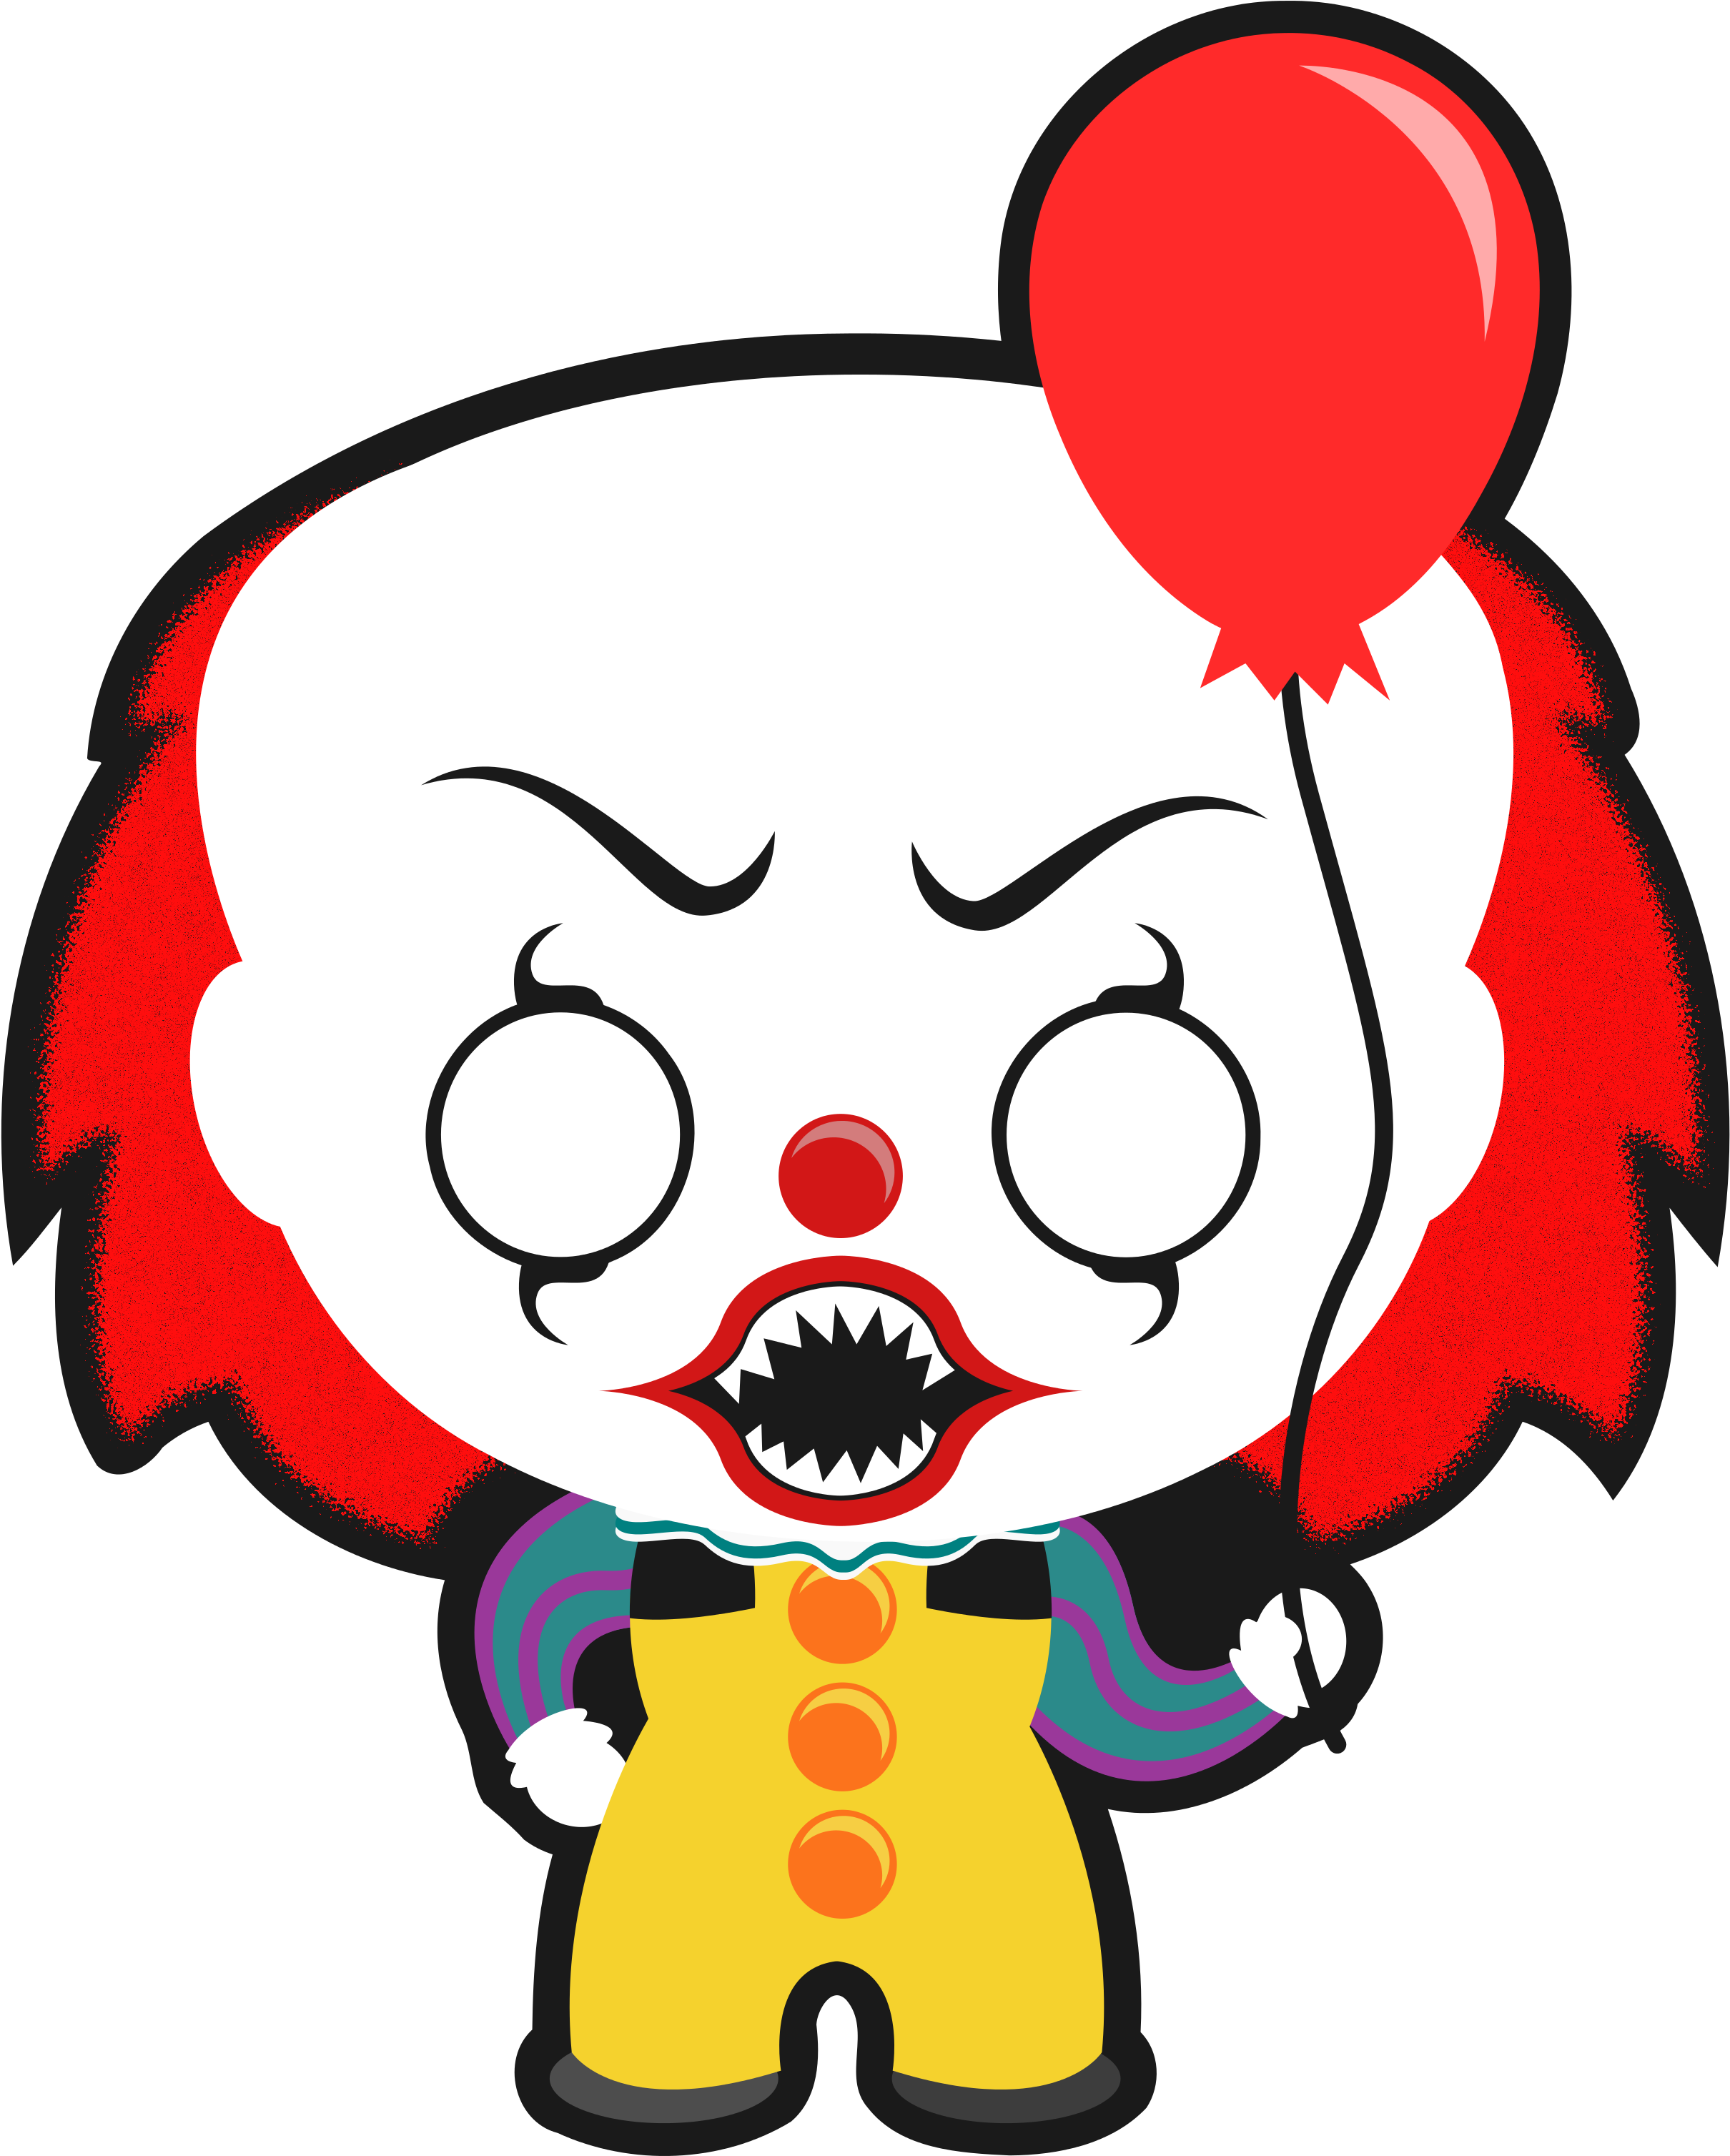 Download and share clipart about Pennywise From Stephen King - Jason Voorhe...